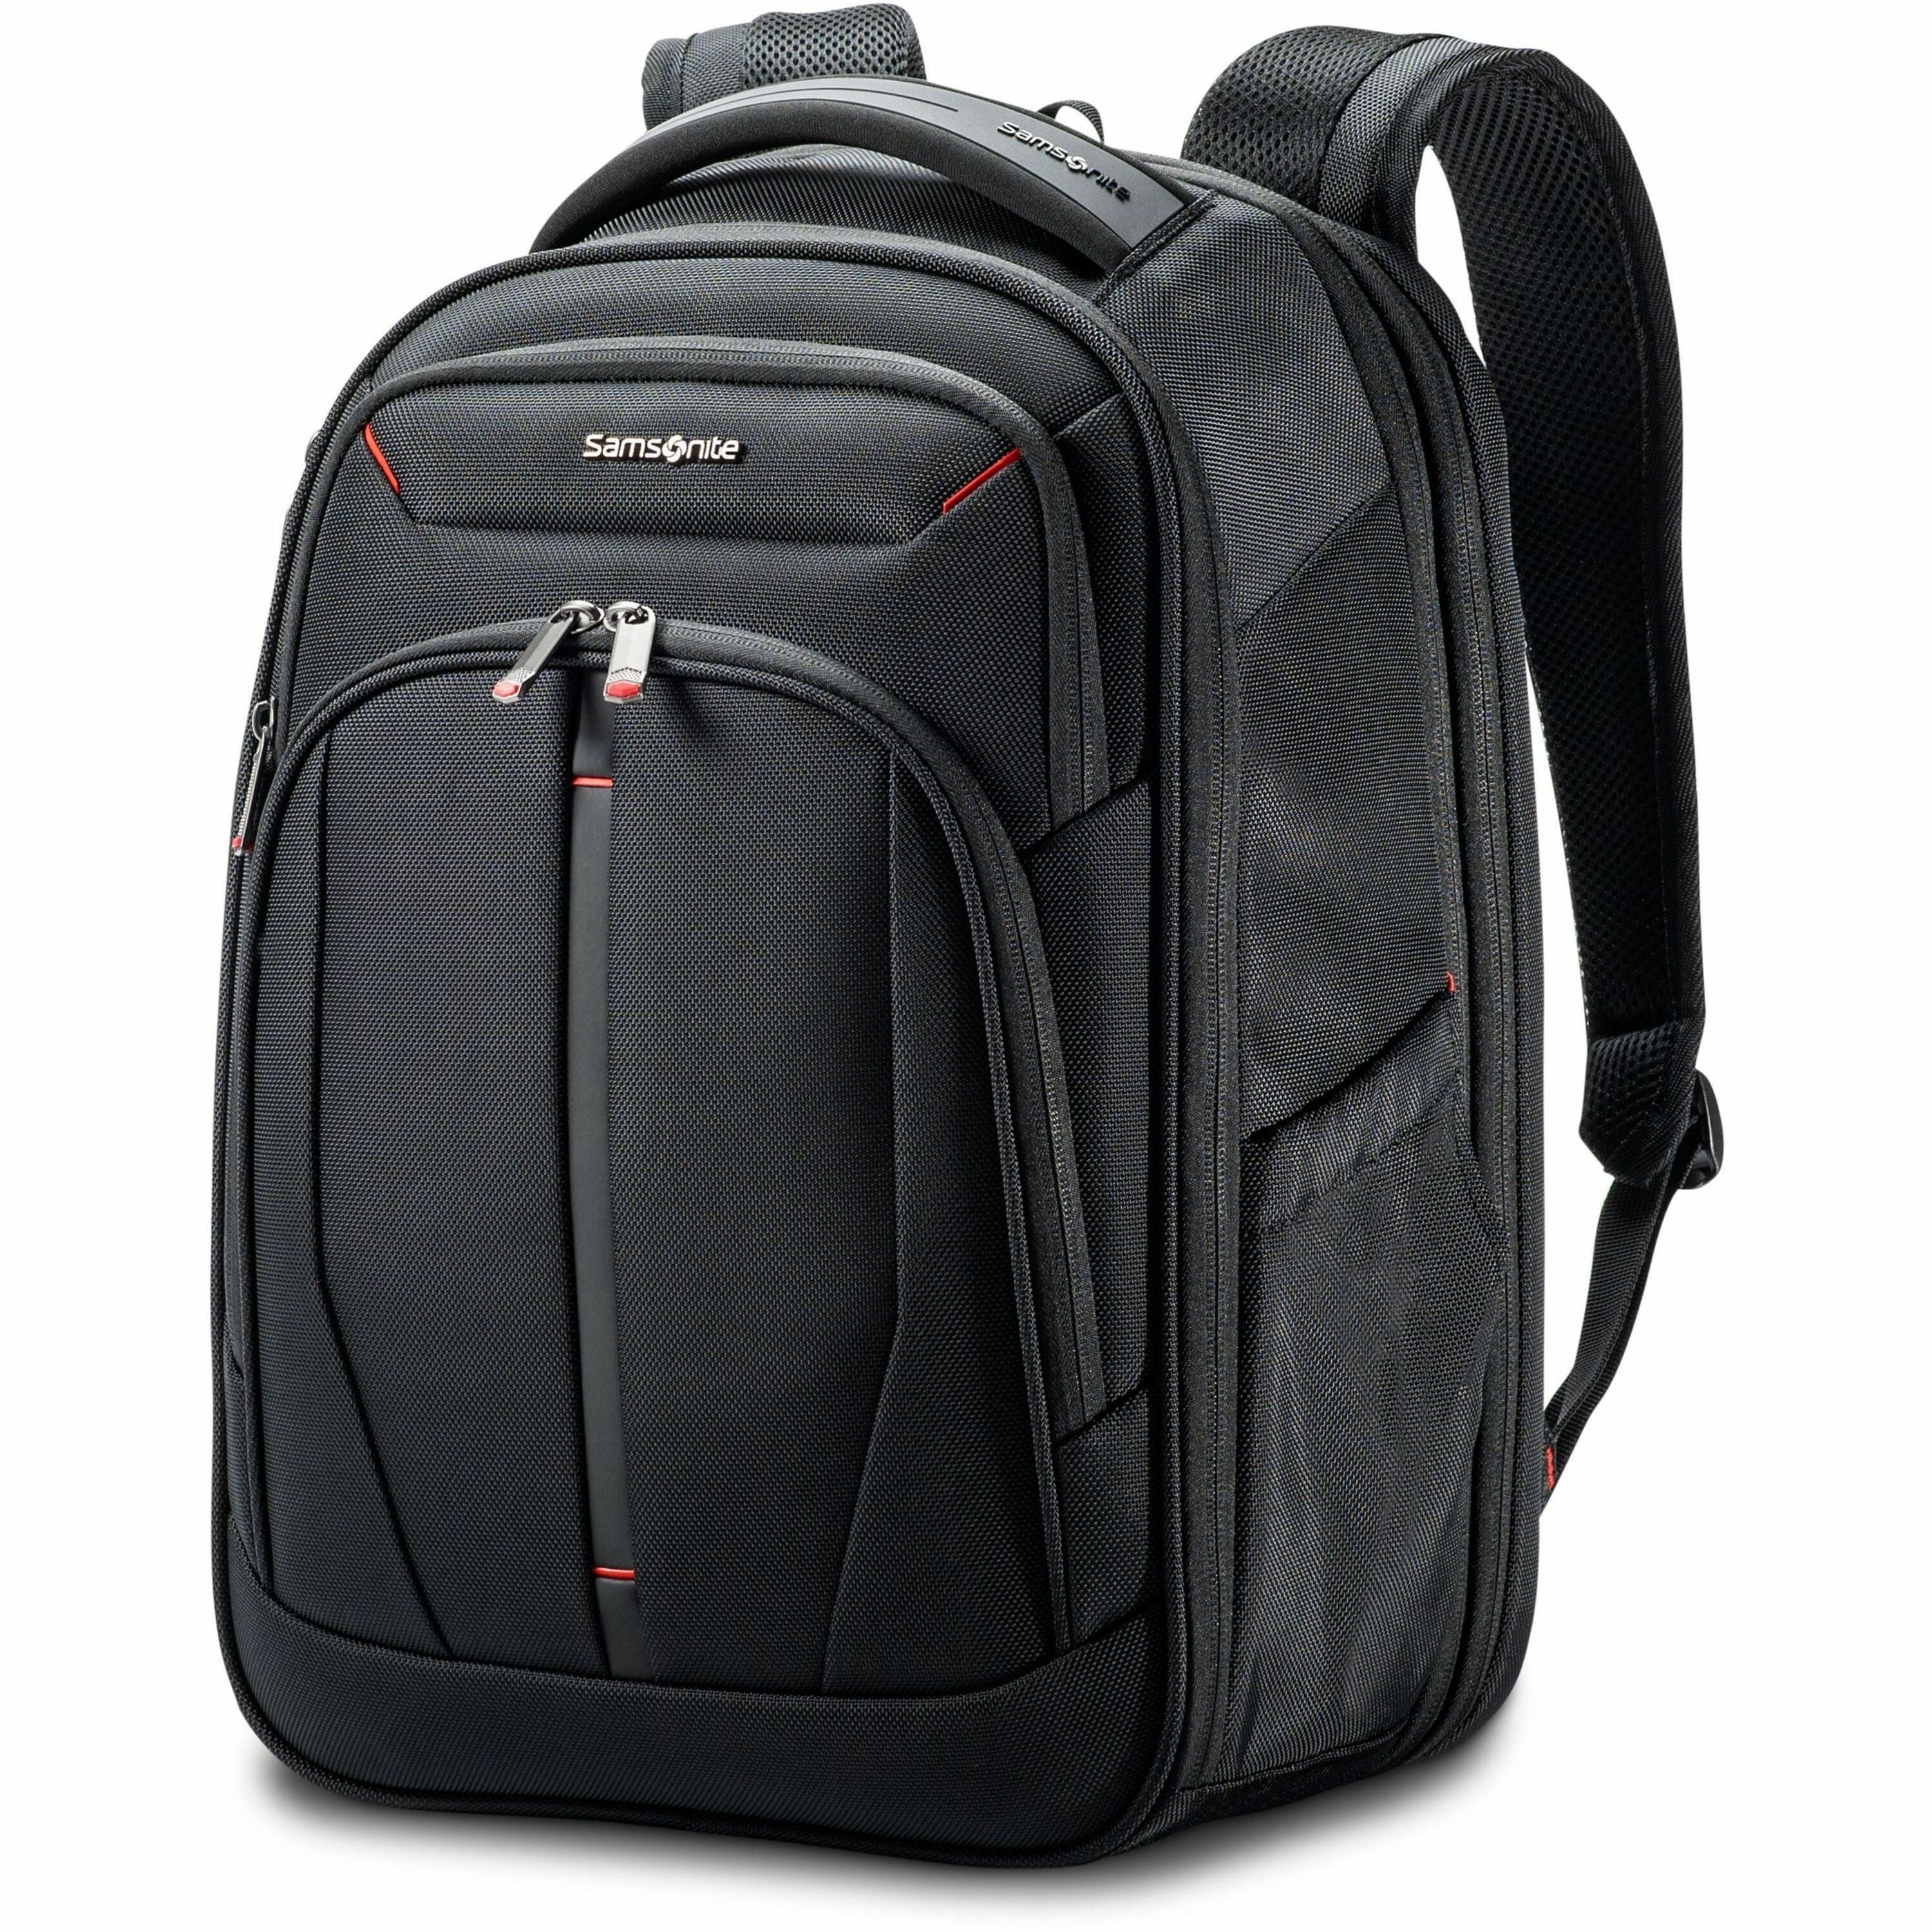 samsonite-carrying-case-backpack-for-129-to-156-notebook-file-book-table-black-1680d-ballistic-polyester-mesh-body-tricot-interior-material-handle-shoulder-strap-1-each_sml1473291041 - 1